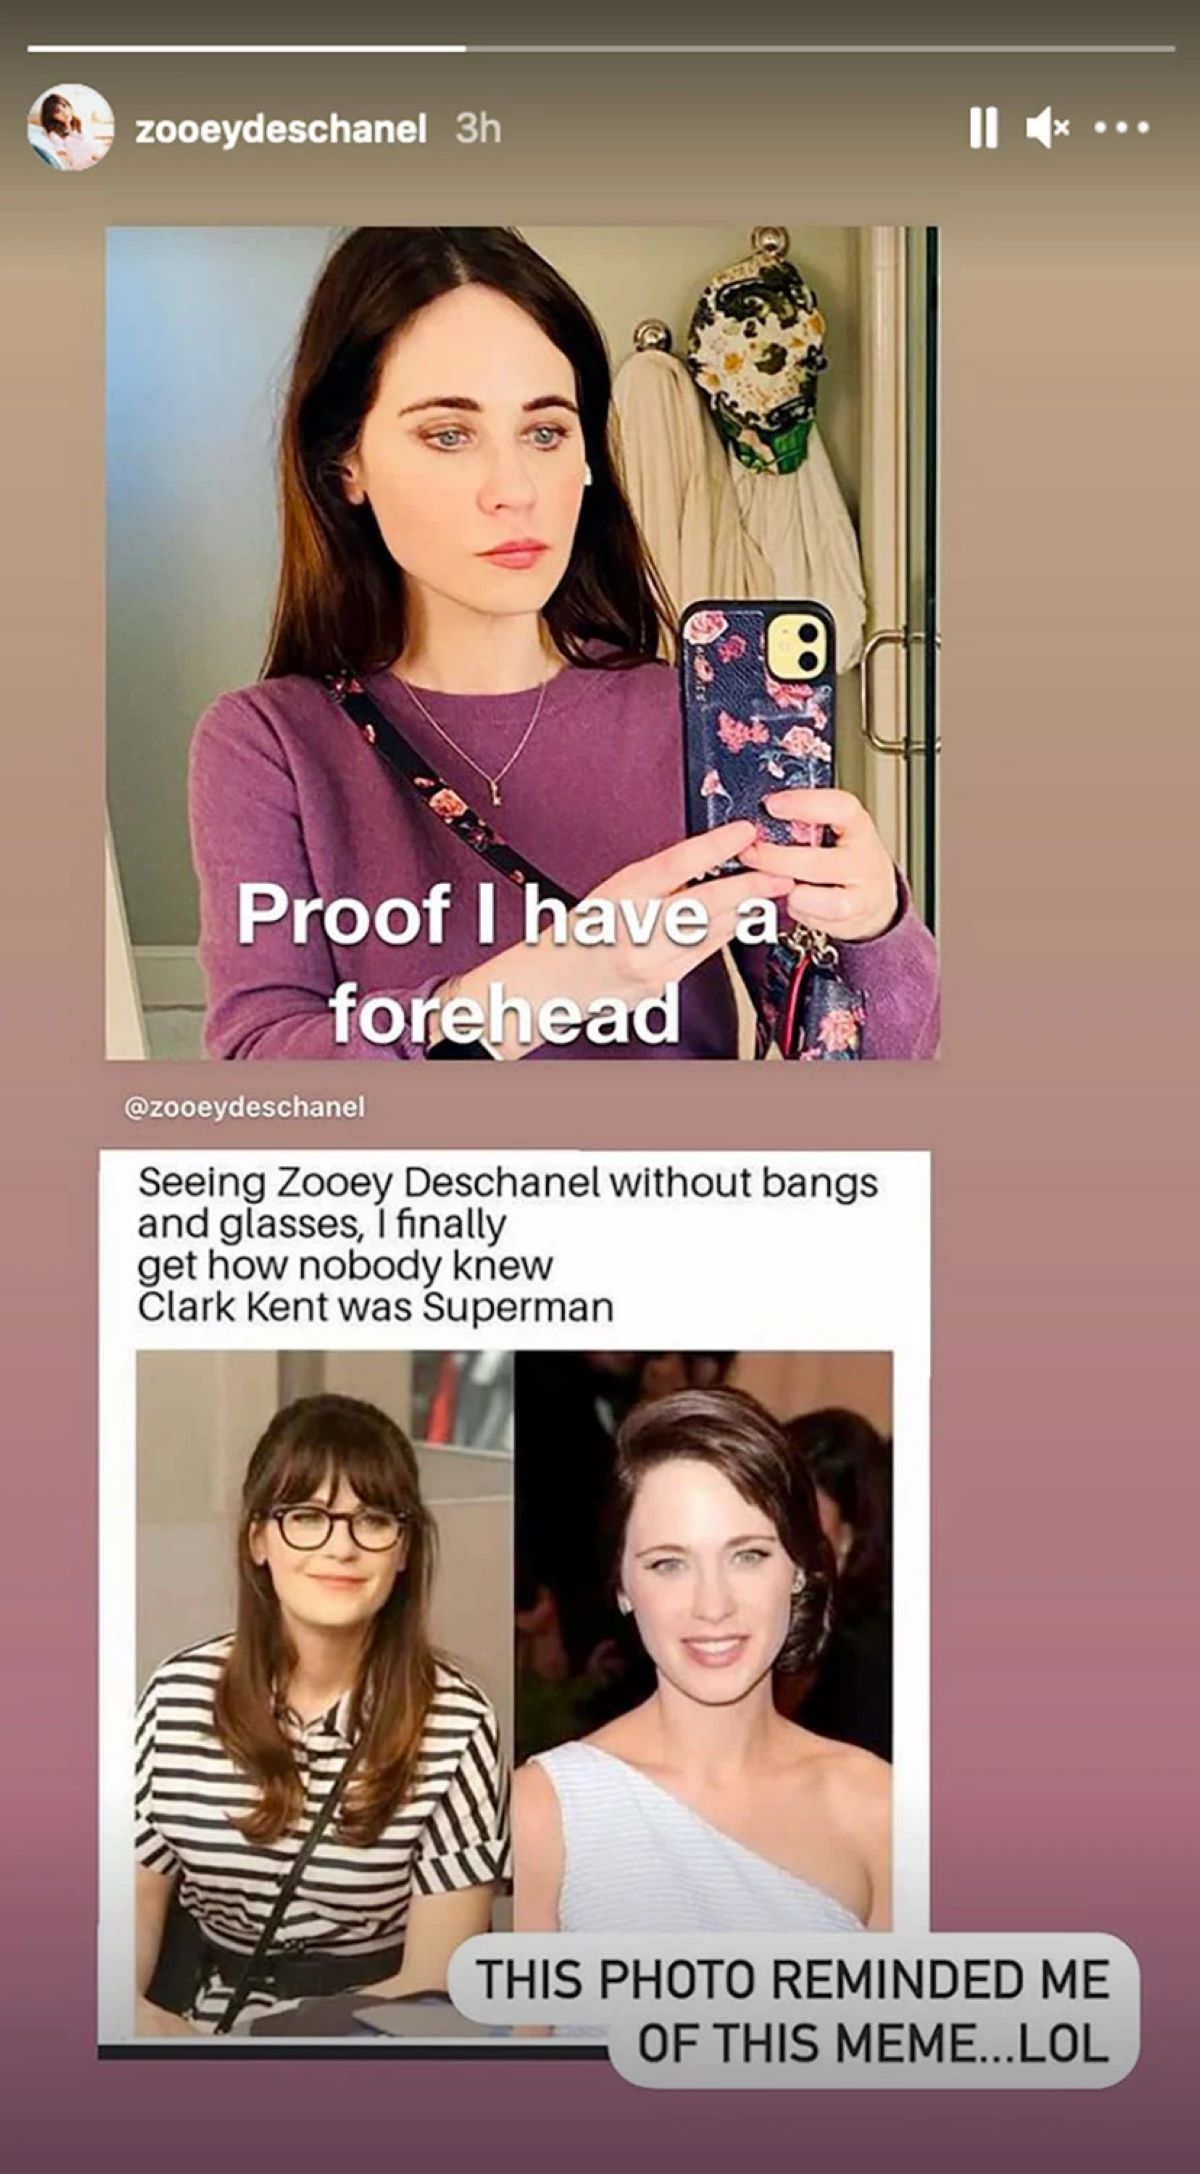 Zooey Deschanel reaction post about a meme poking fun at her